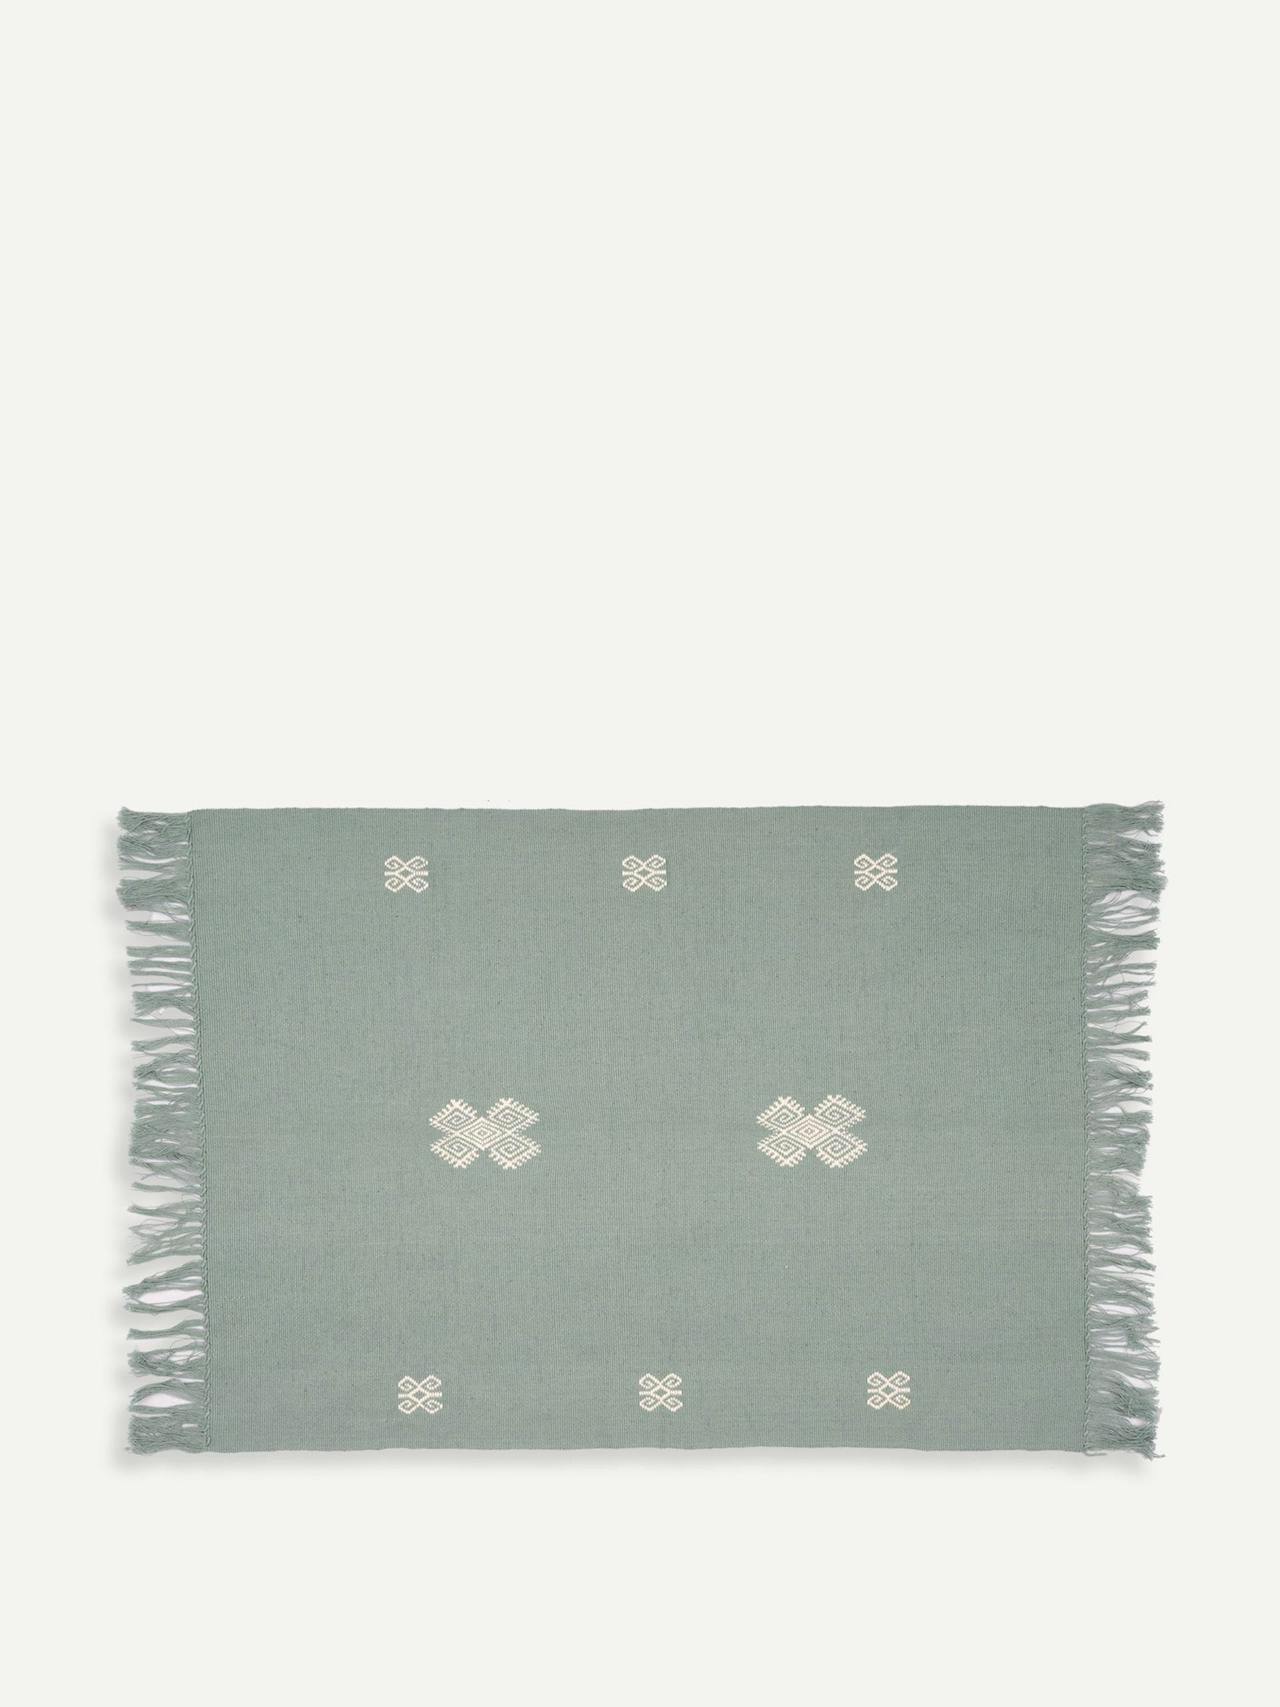 Grey Arrazola handwoven placemats, set of 2